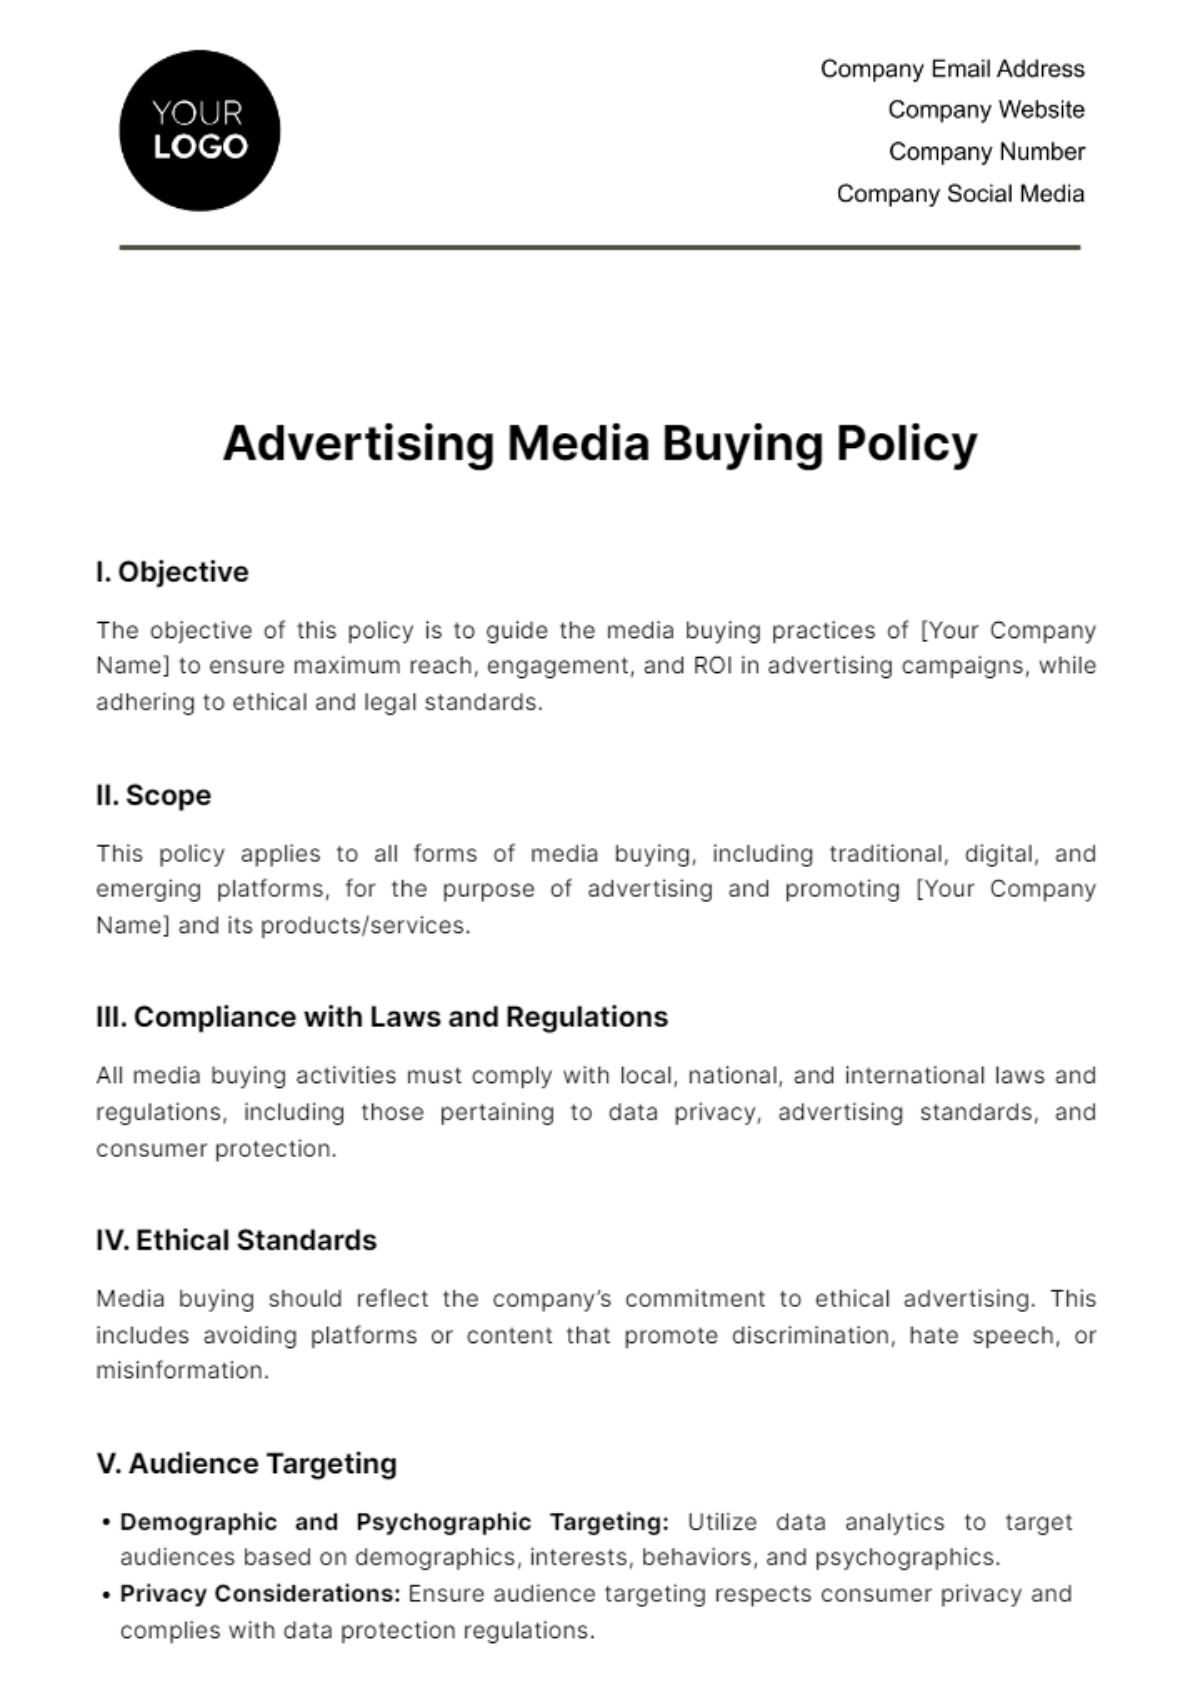 Advertising Media Buying Policy Template